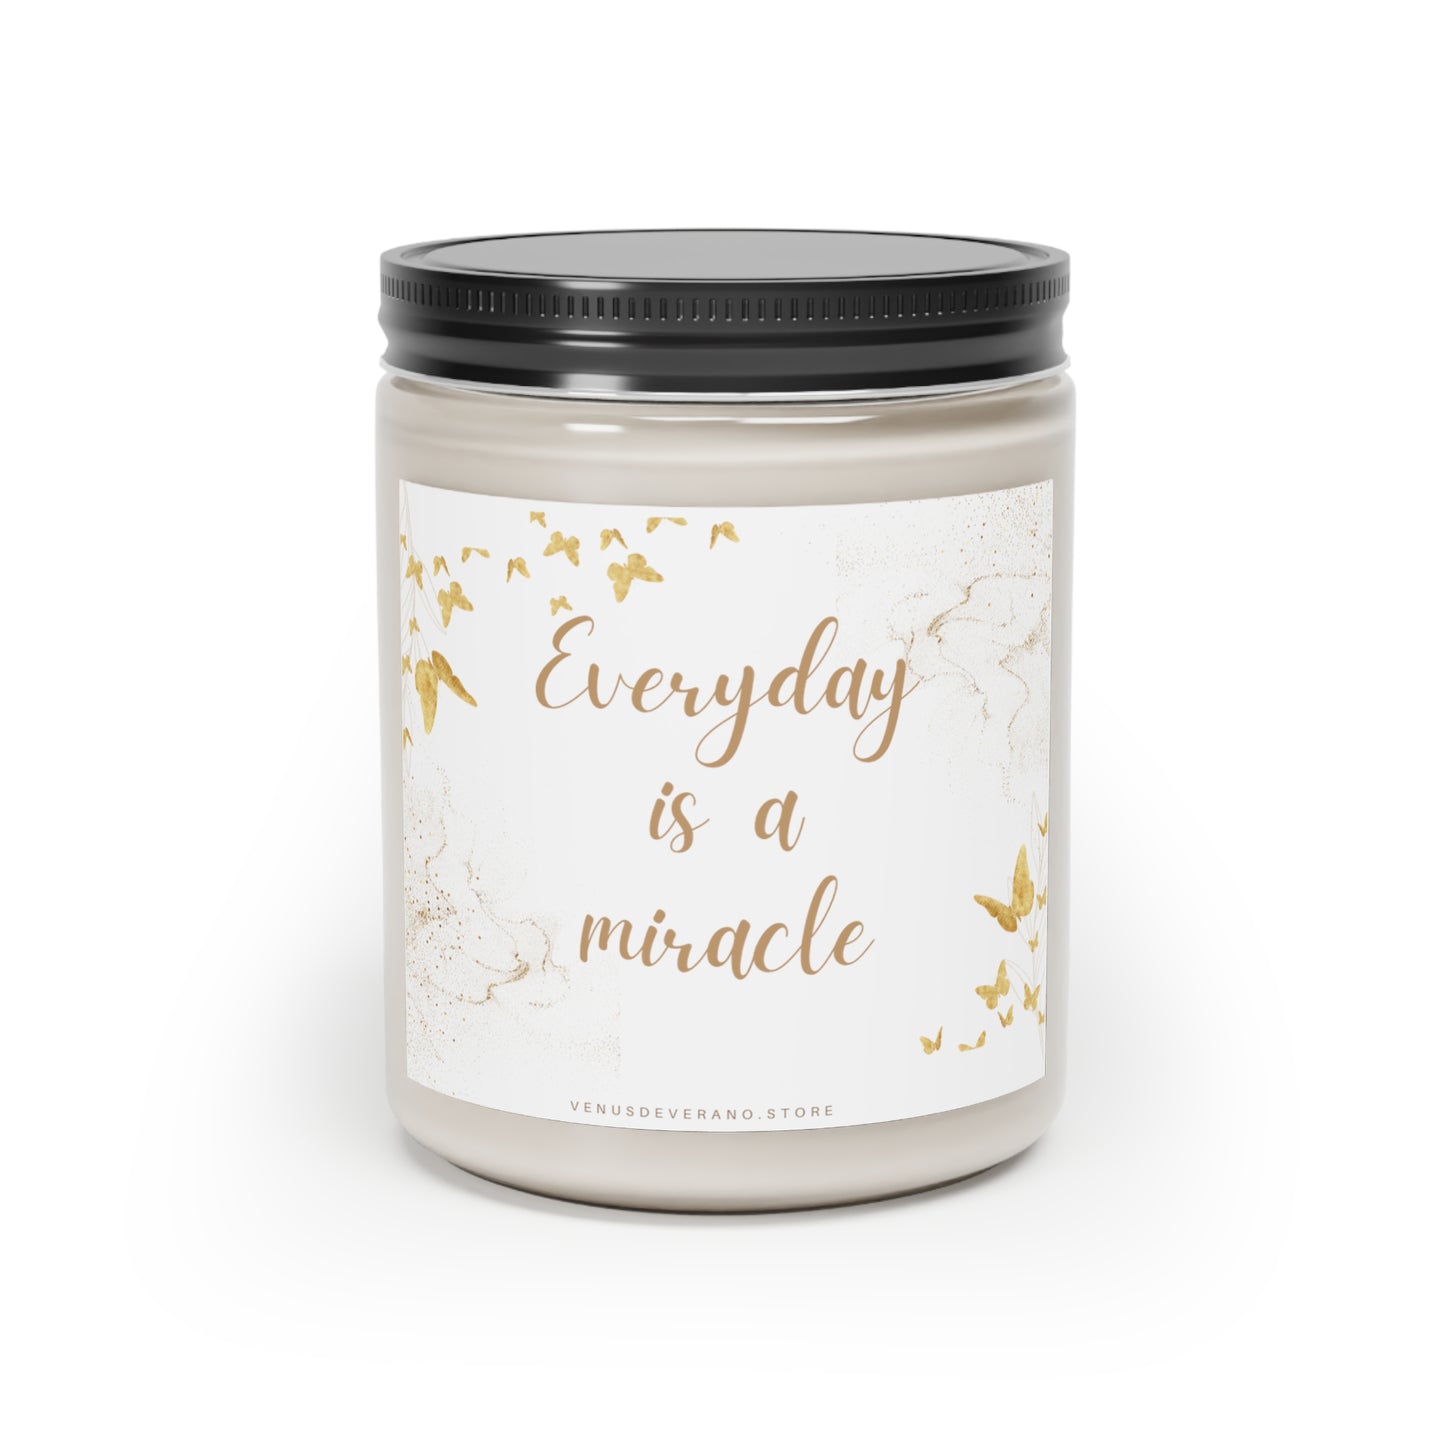 Scented Candle, 9oz - Everyday is a MIRACLE - Made from vegan soy coconut wax, hand-poured | 2 ambrosial fragrances available, Cinnamon Stick and Vanilla.